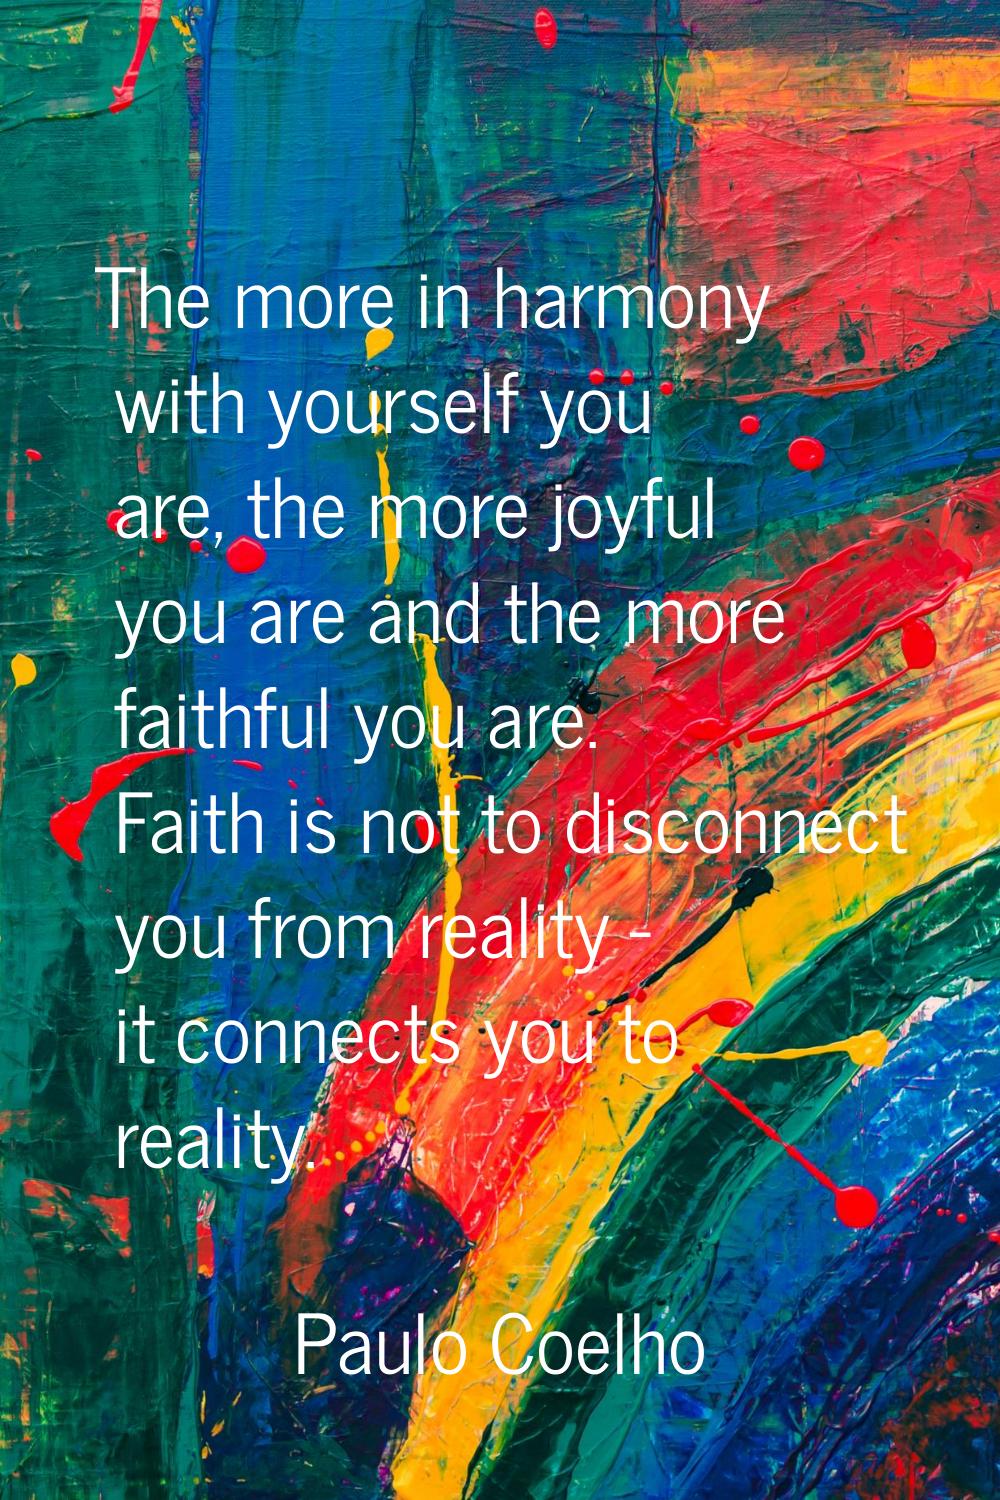 The more in harmony with yourself you are, the more joyful you are and the more faithful you are. F